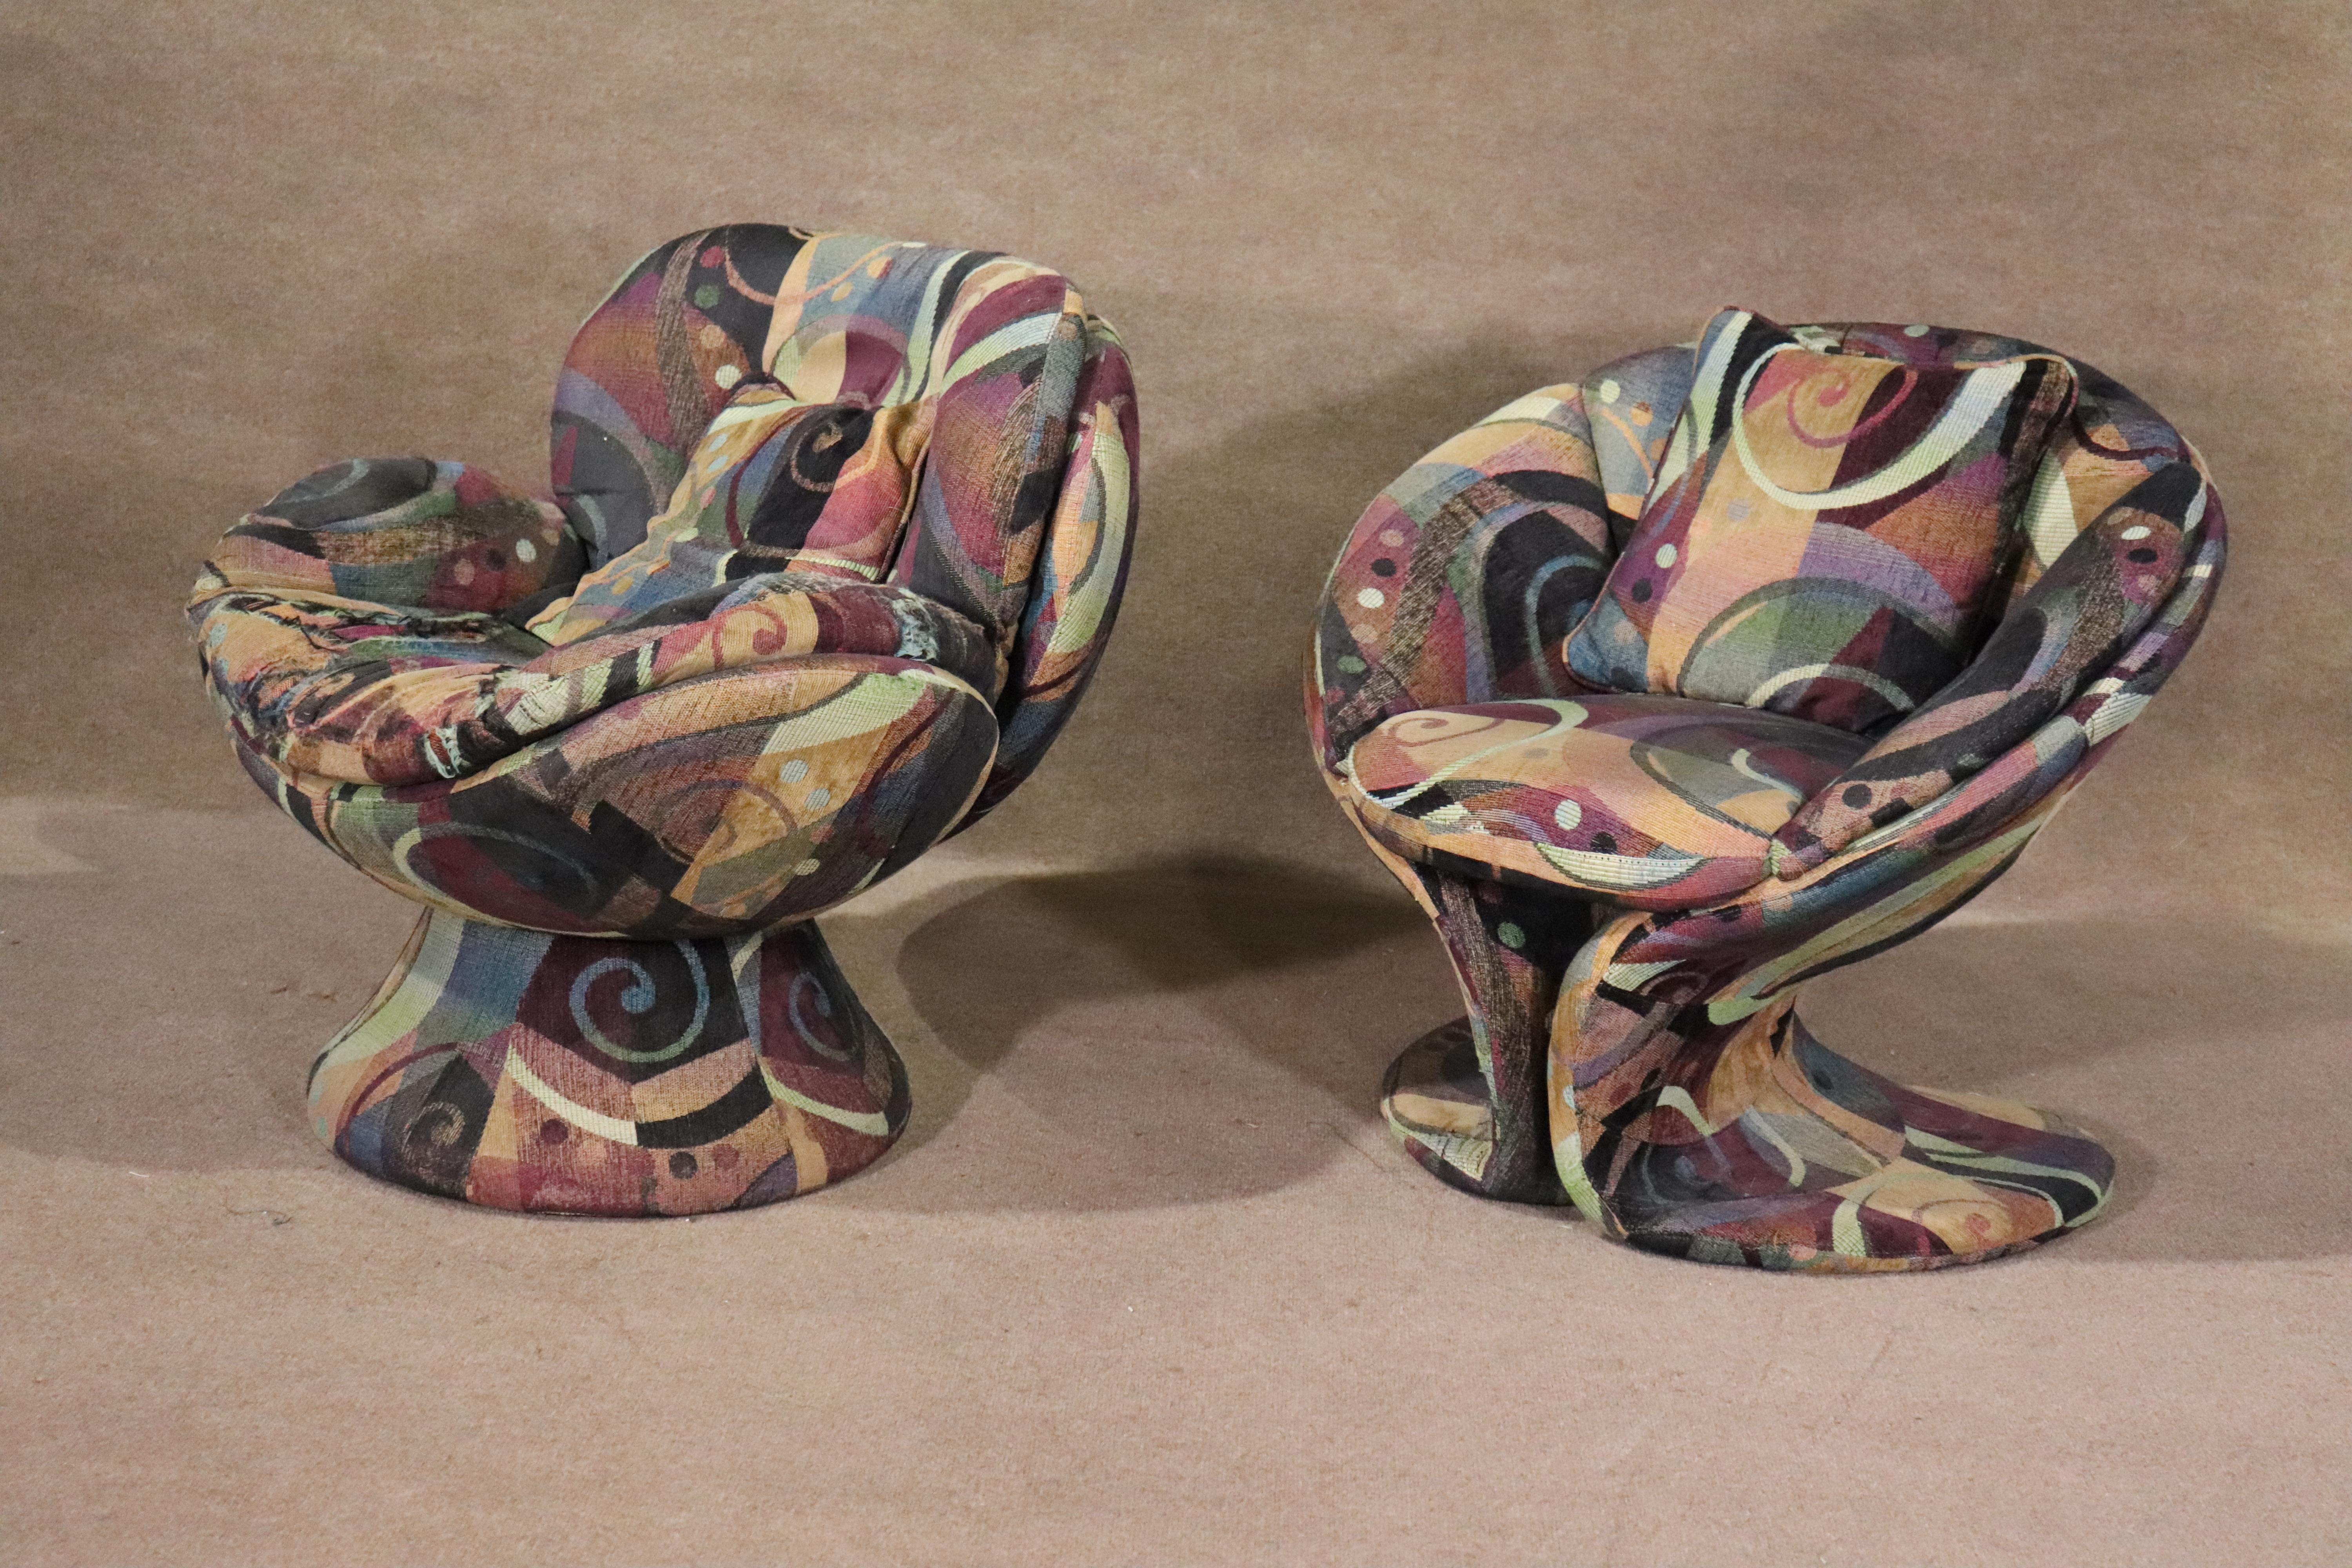 Mid-century modern lounge chairs with wild sculpting shape. Funky 1960s style form for home or office.
Please confirm location NY or NJ